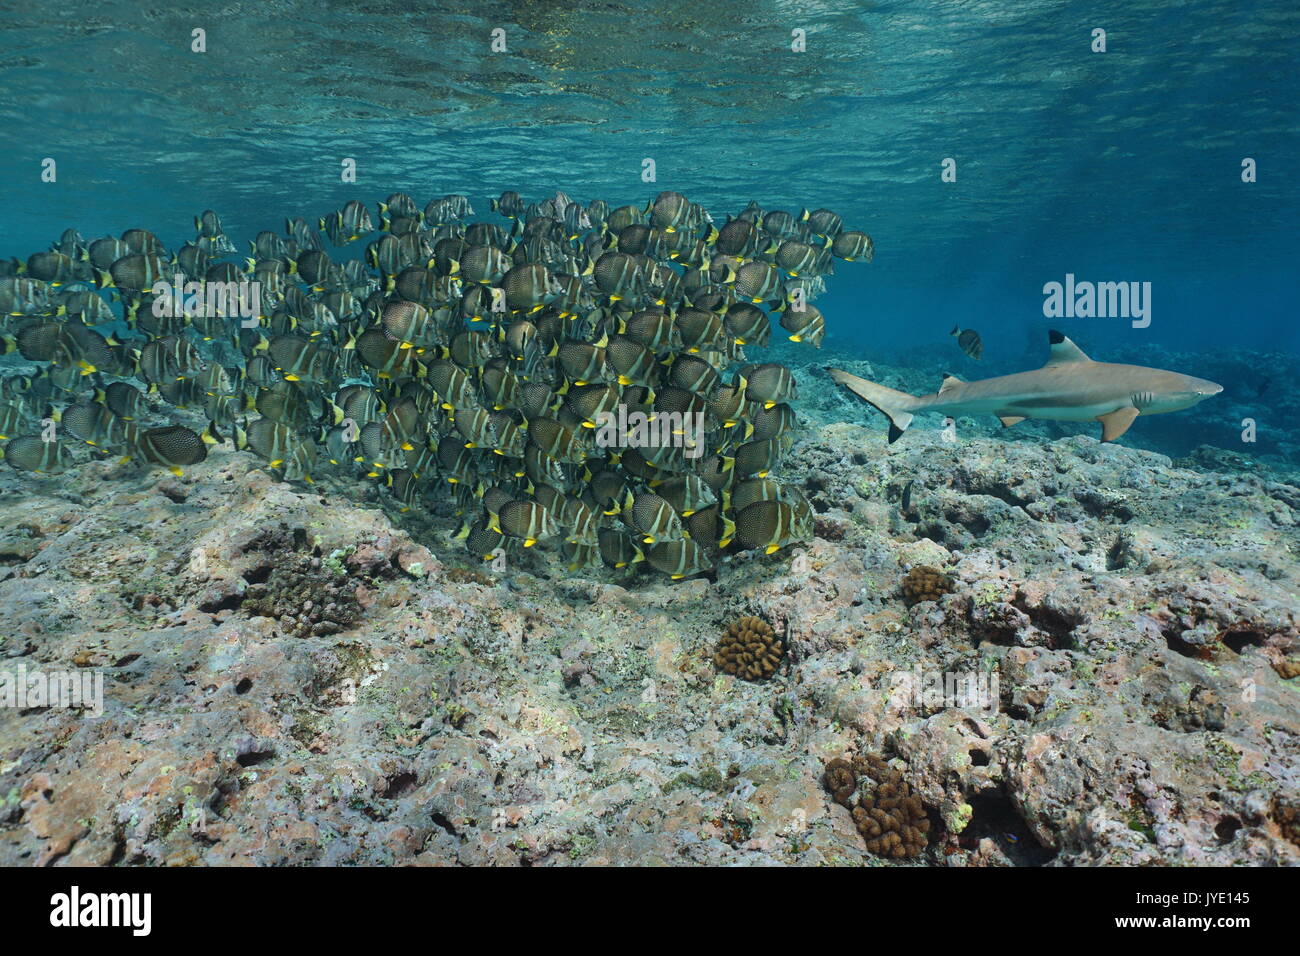 A school of tropical fish (whitespotted surgeonfish) follow a blacktip reef shark underwater in the Pacific ocean, natural scene, French Polynesia Stock Photo